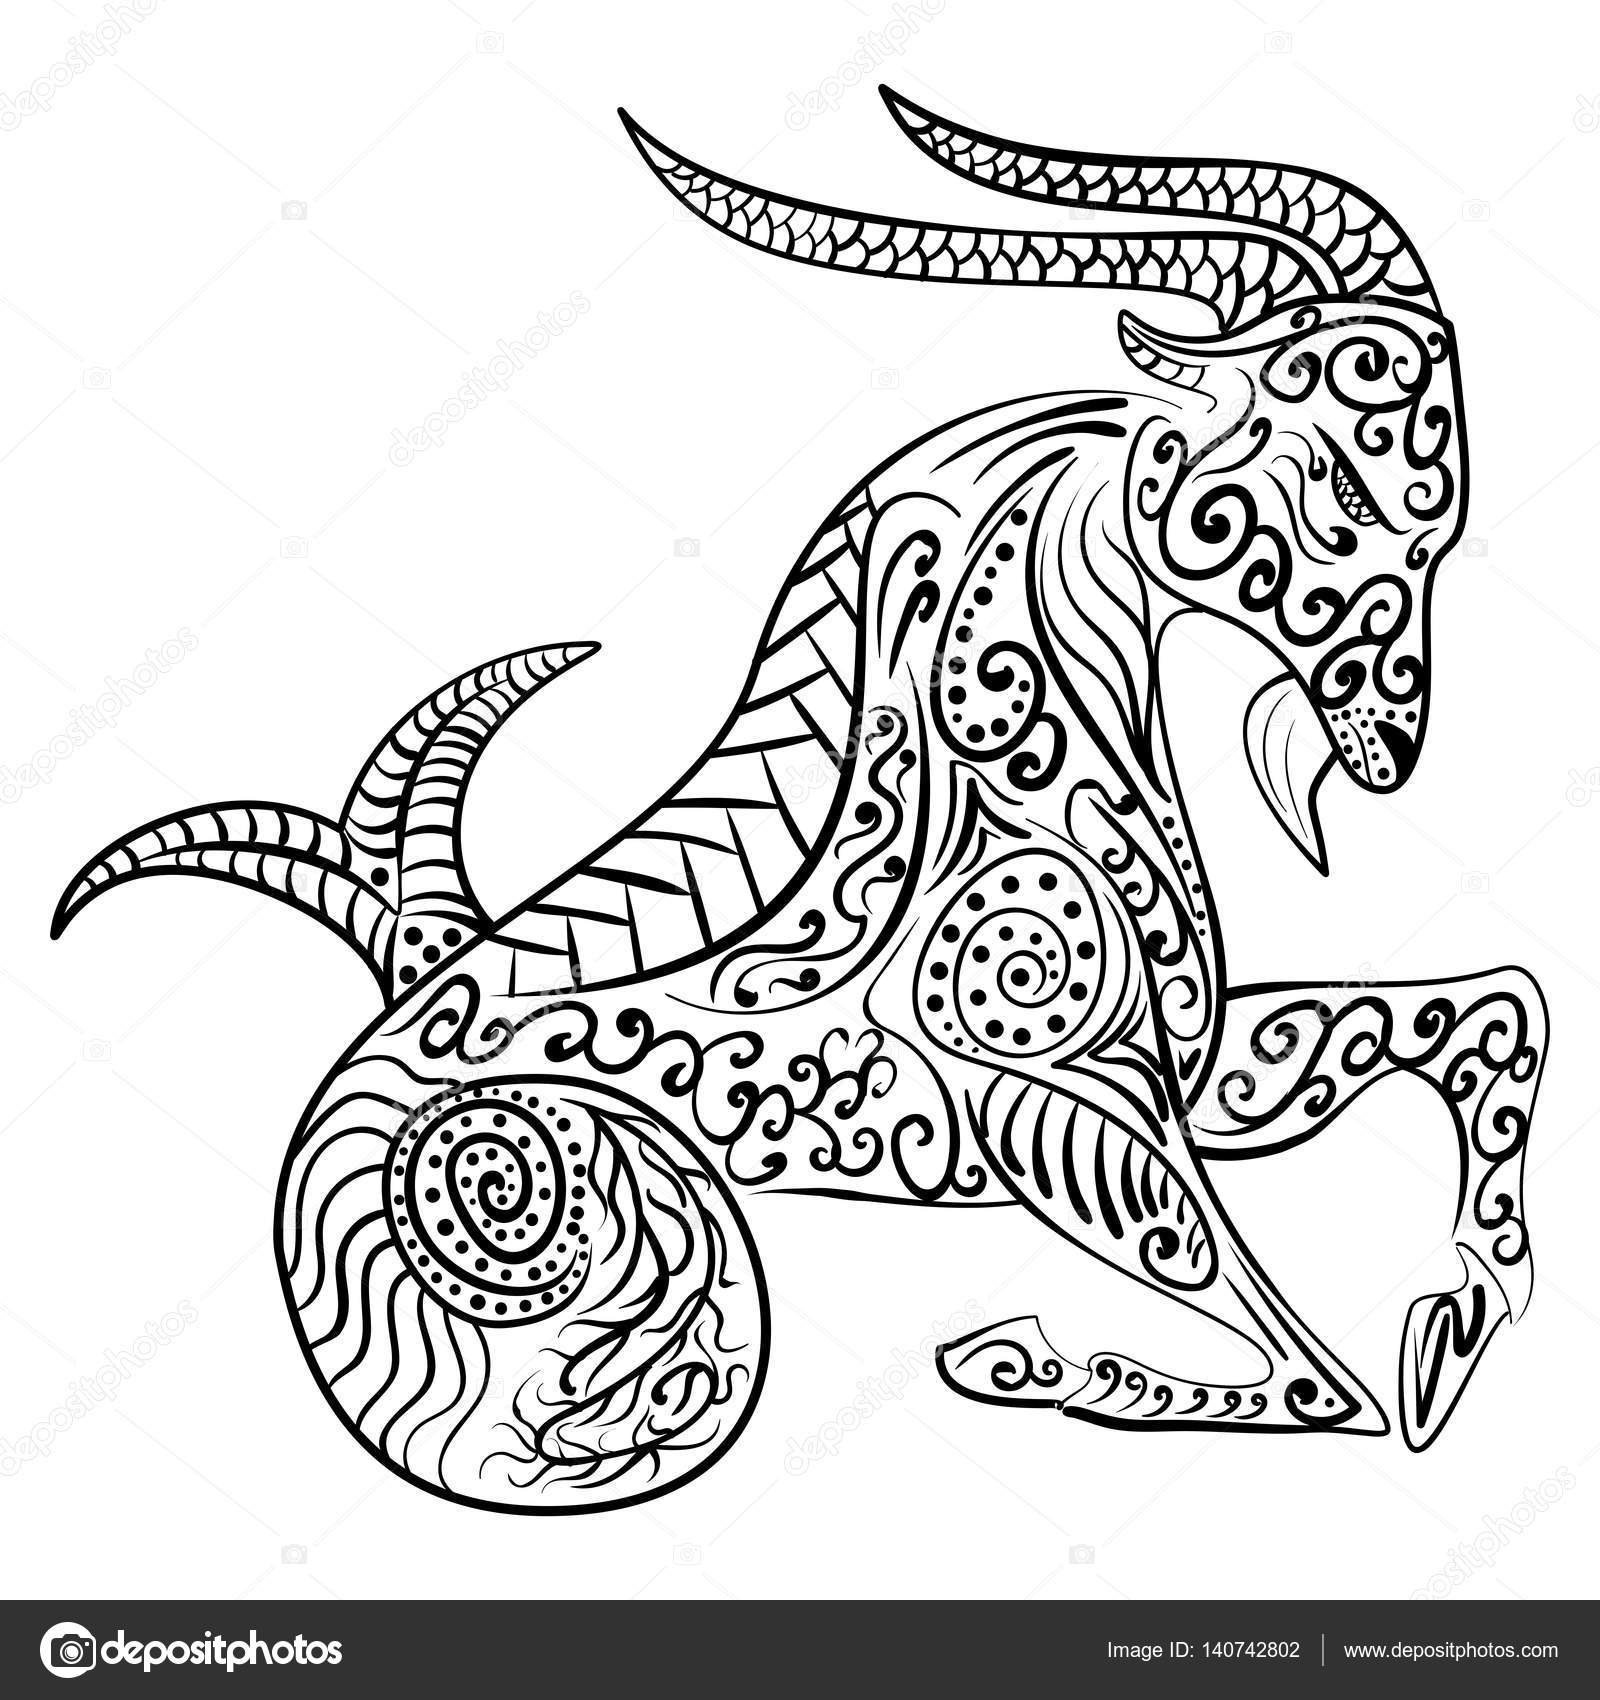 The best free Capricorn drawing images. Download from 78 free drawings ...